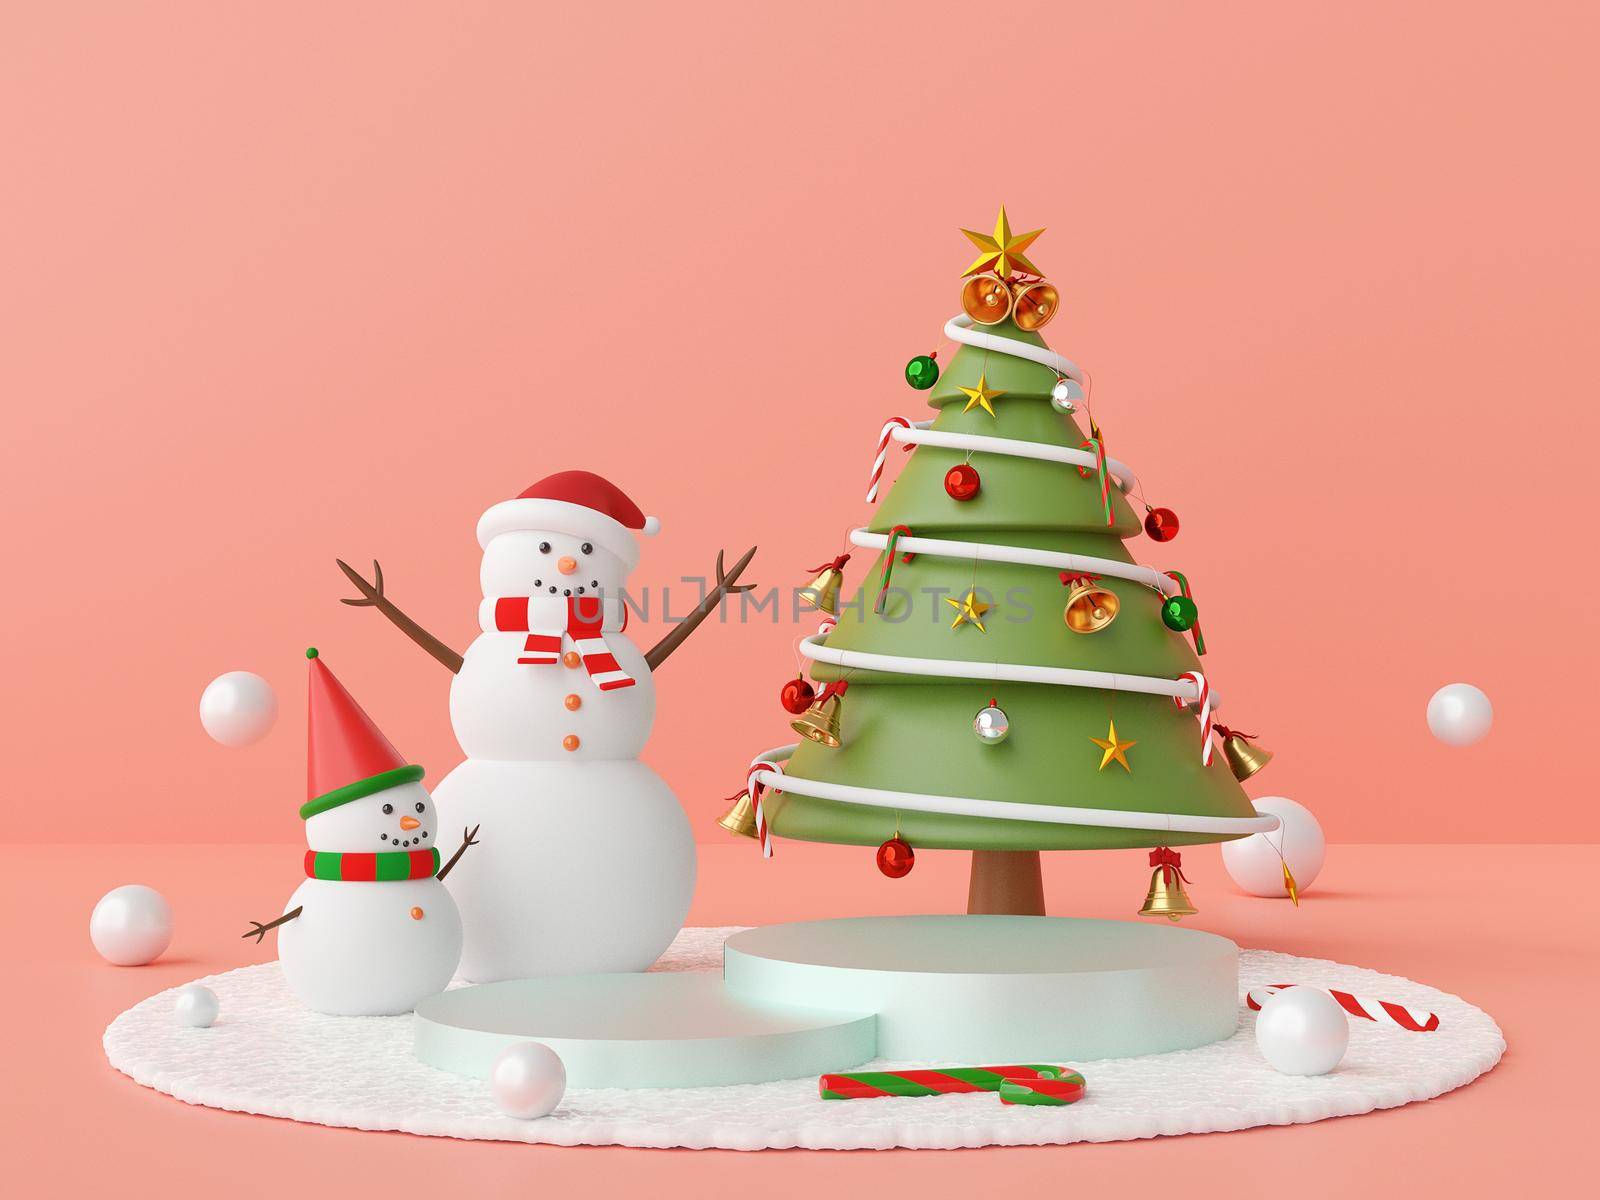 Christmas scene podium with snowman and Christmas tree on a pink background, 3d rendering by nutzchotwarut